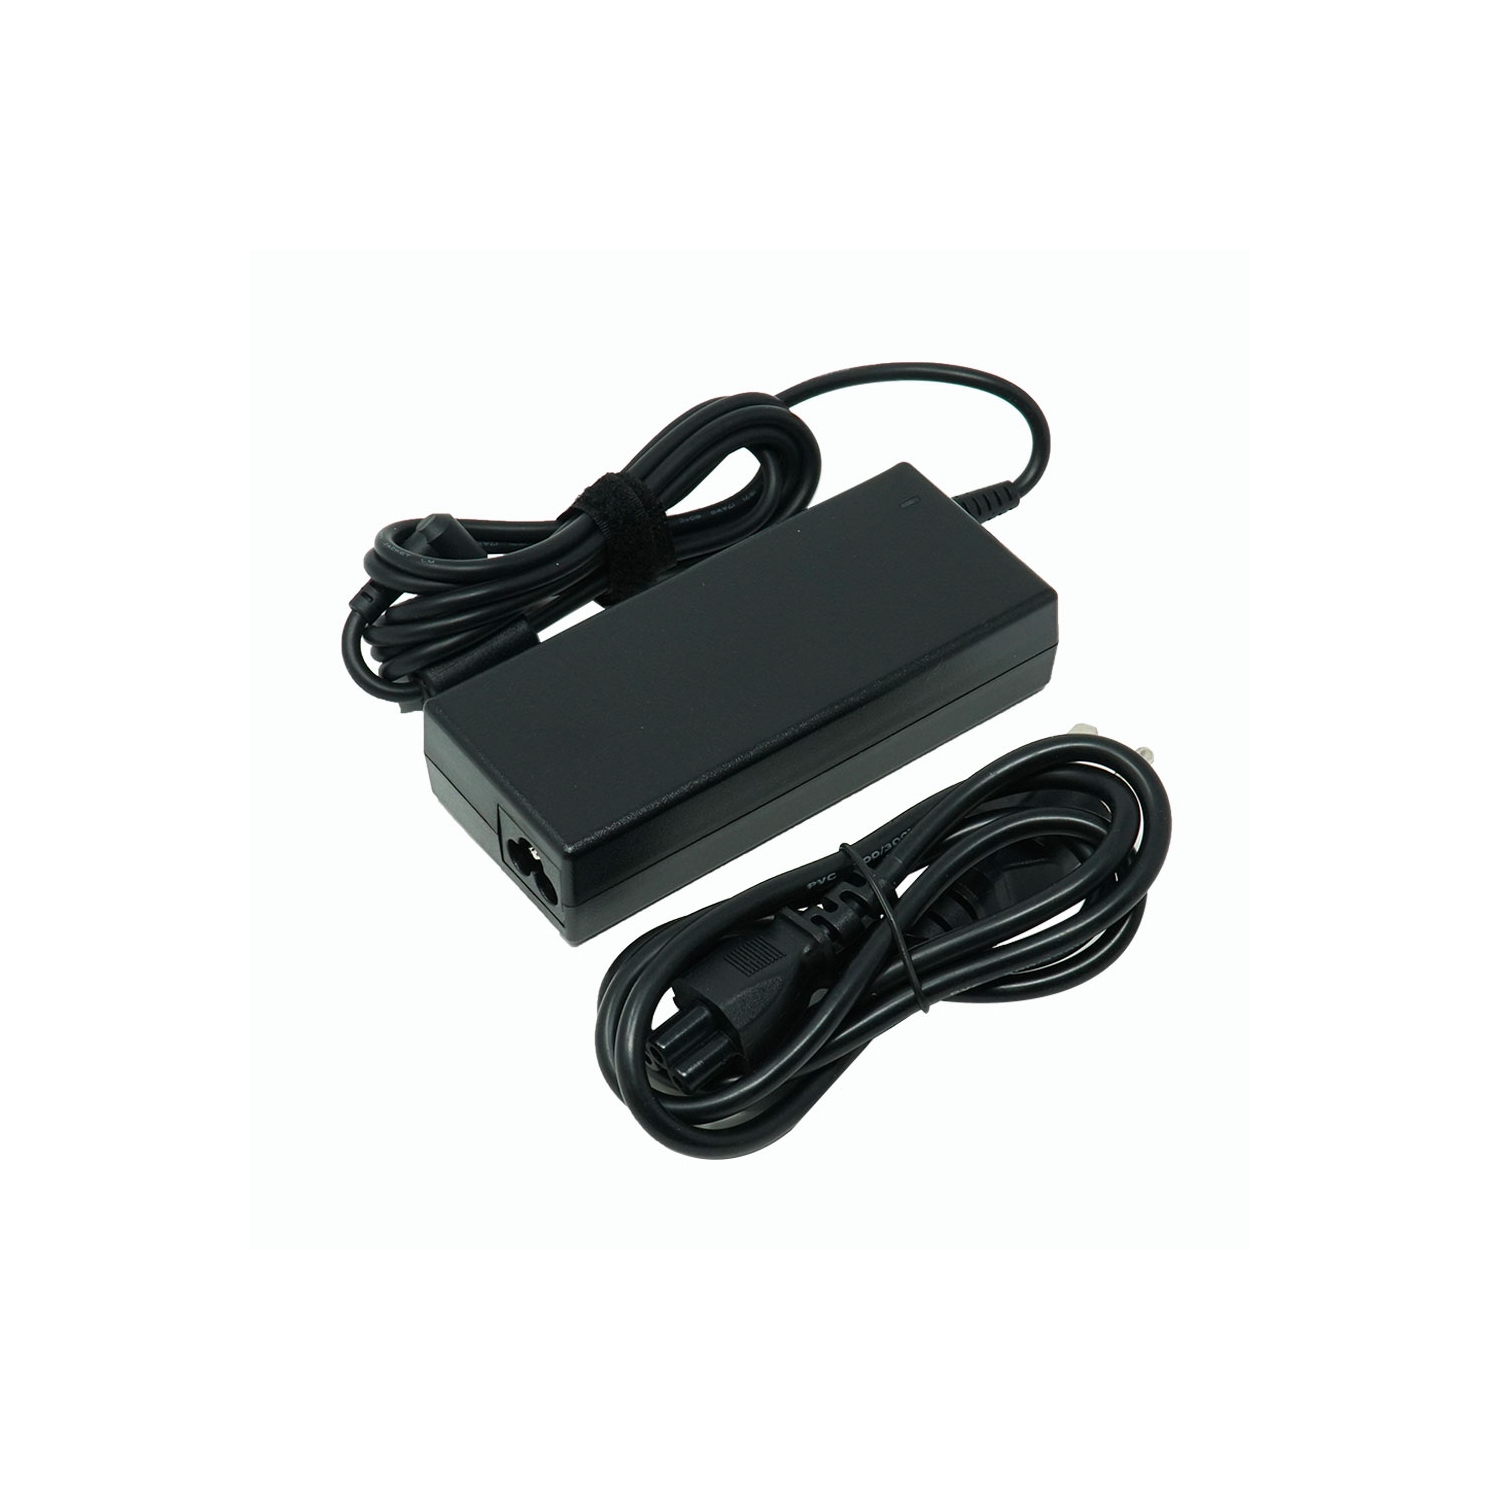 Dr. Battery - Notebook Adapter for Fujitsu LifeBook AH531 / S761 / ACE83-110114 / ADP-45CD - Free Shipping